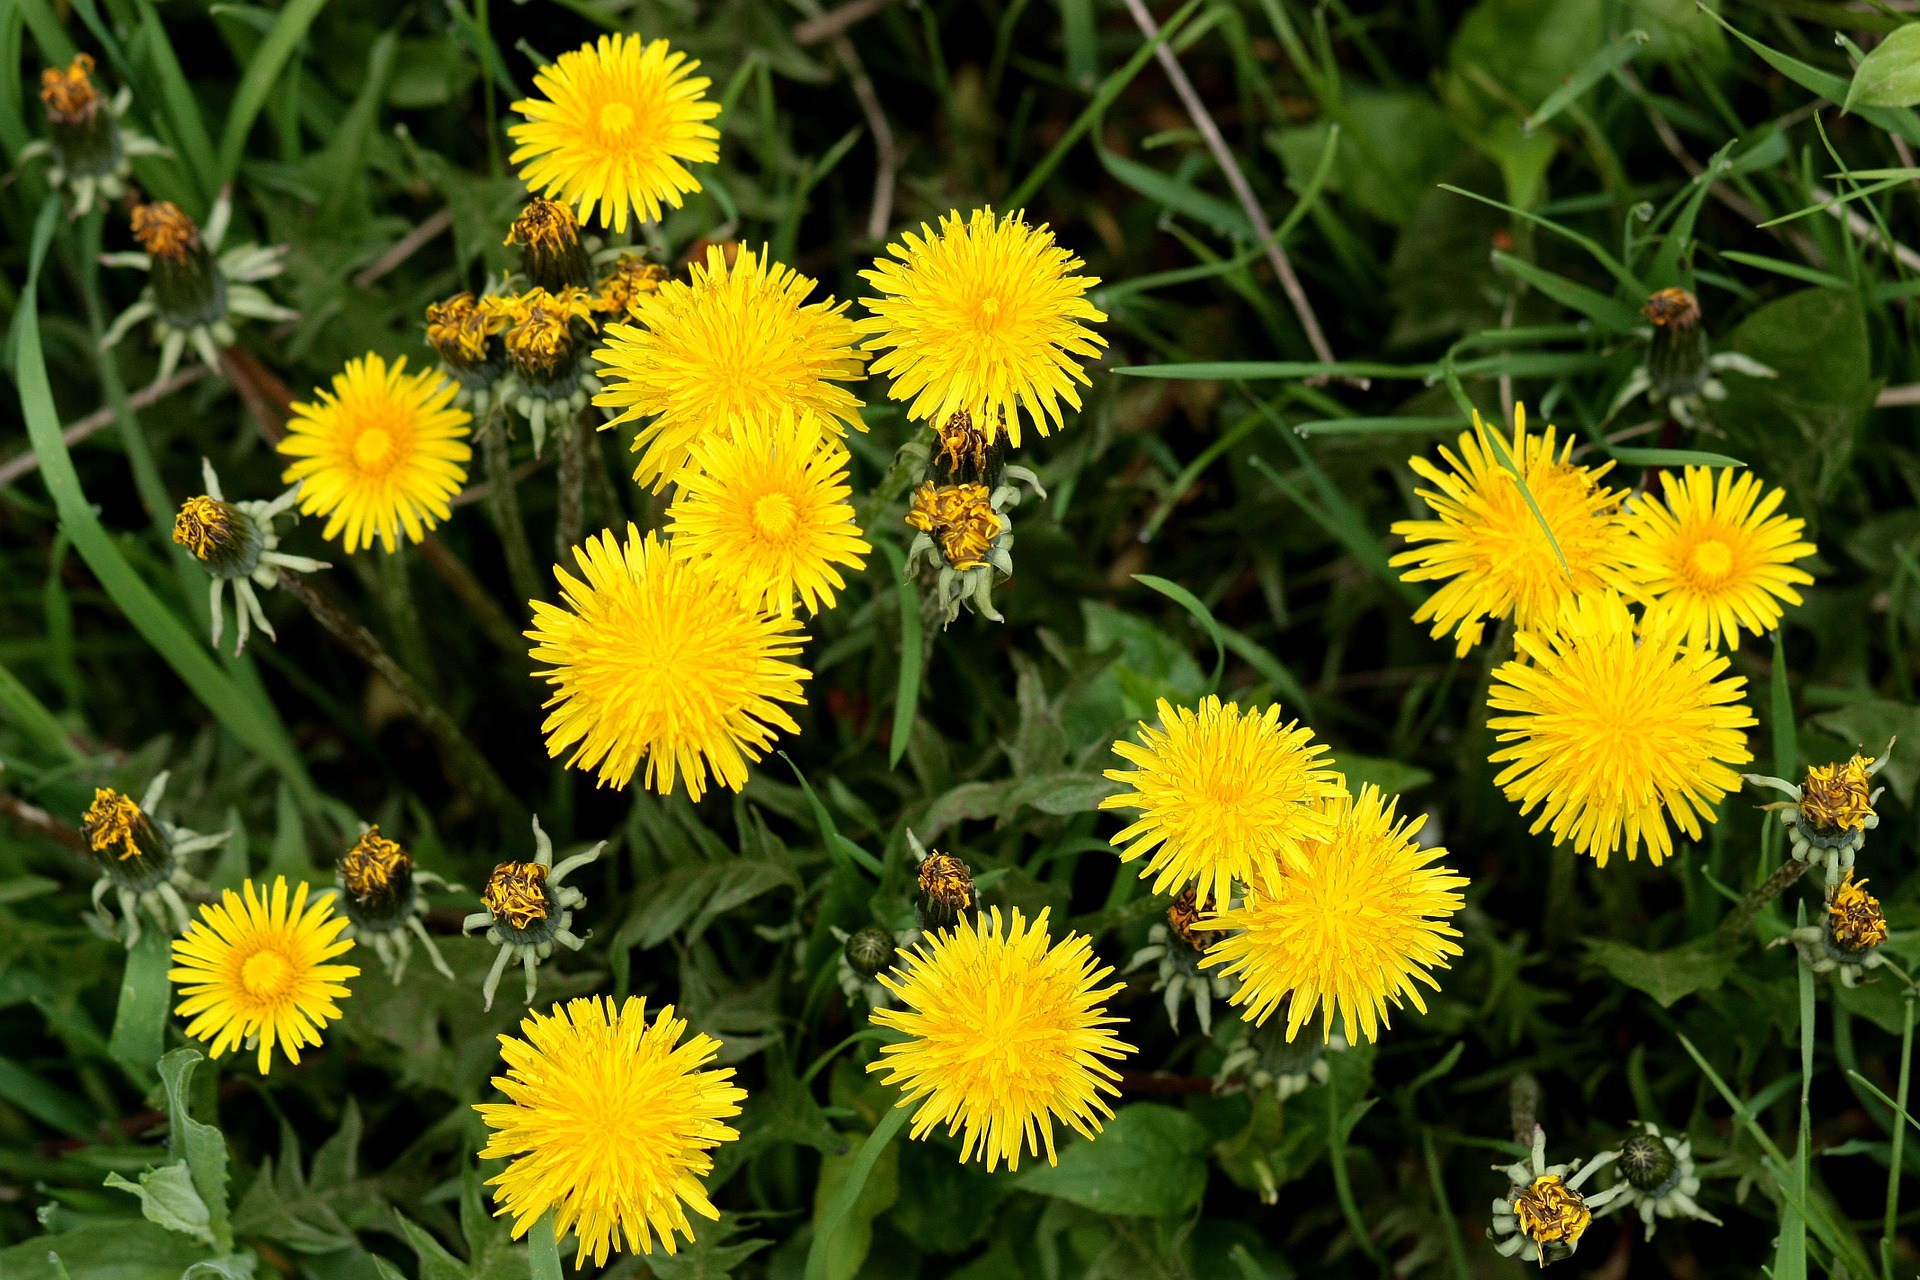 Can dandelion root tea cure cancer? | Healthy Living SG